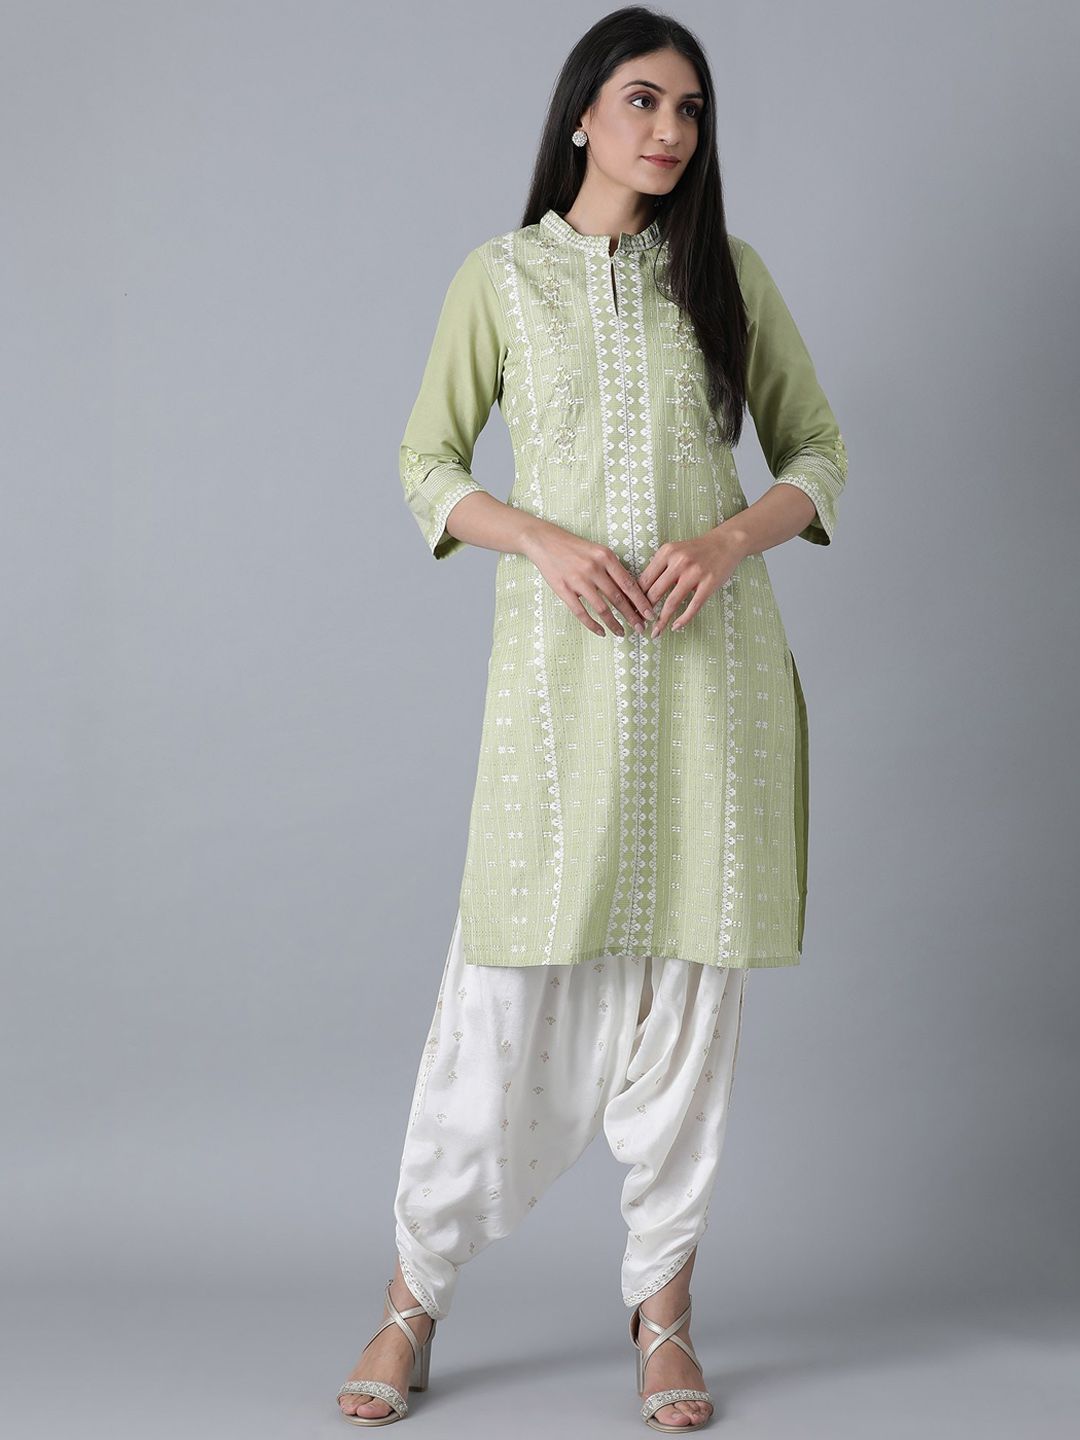 W Women Green Floral Embroidered Thread Work Kurta Price in India